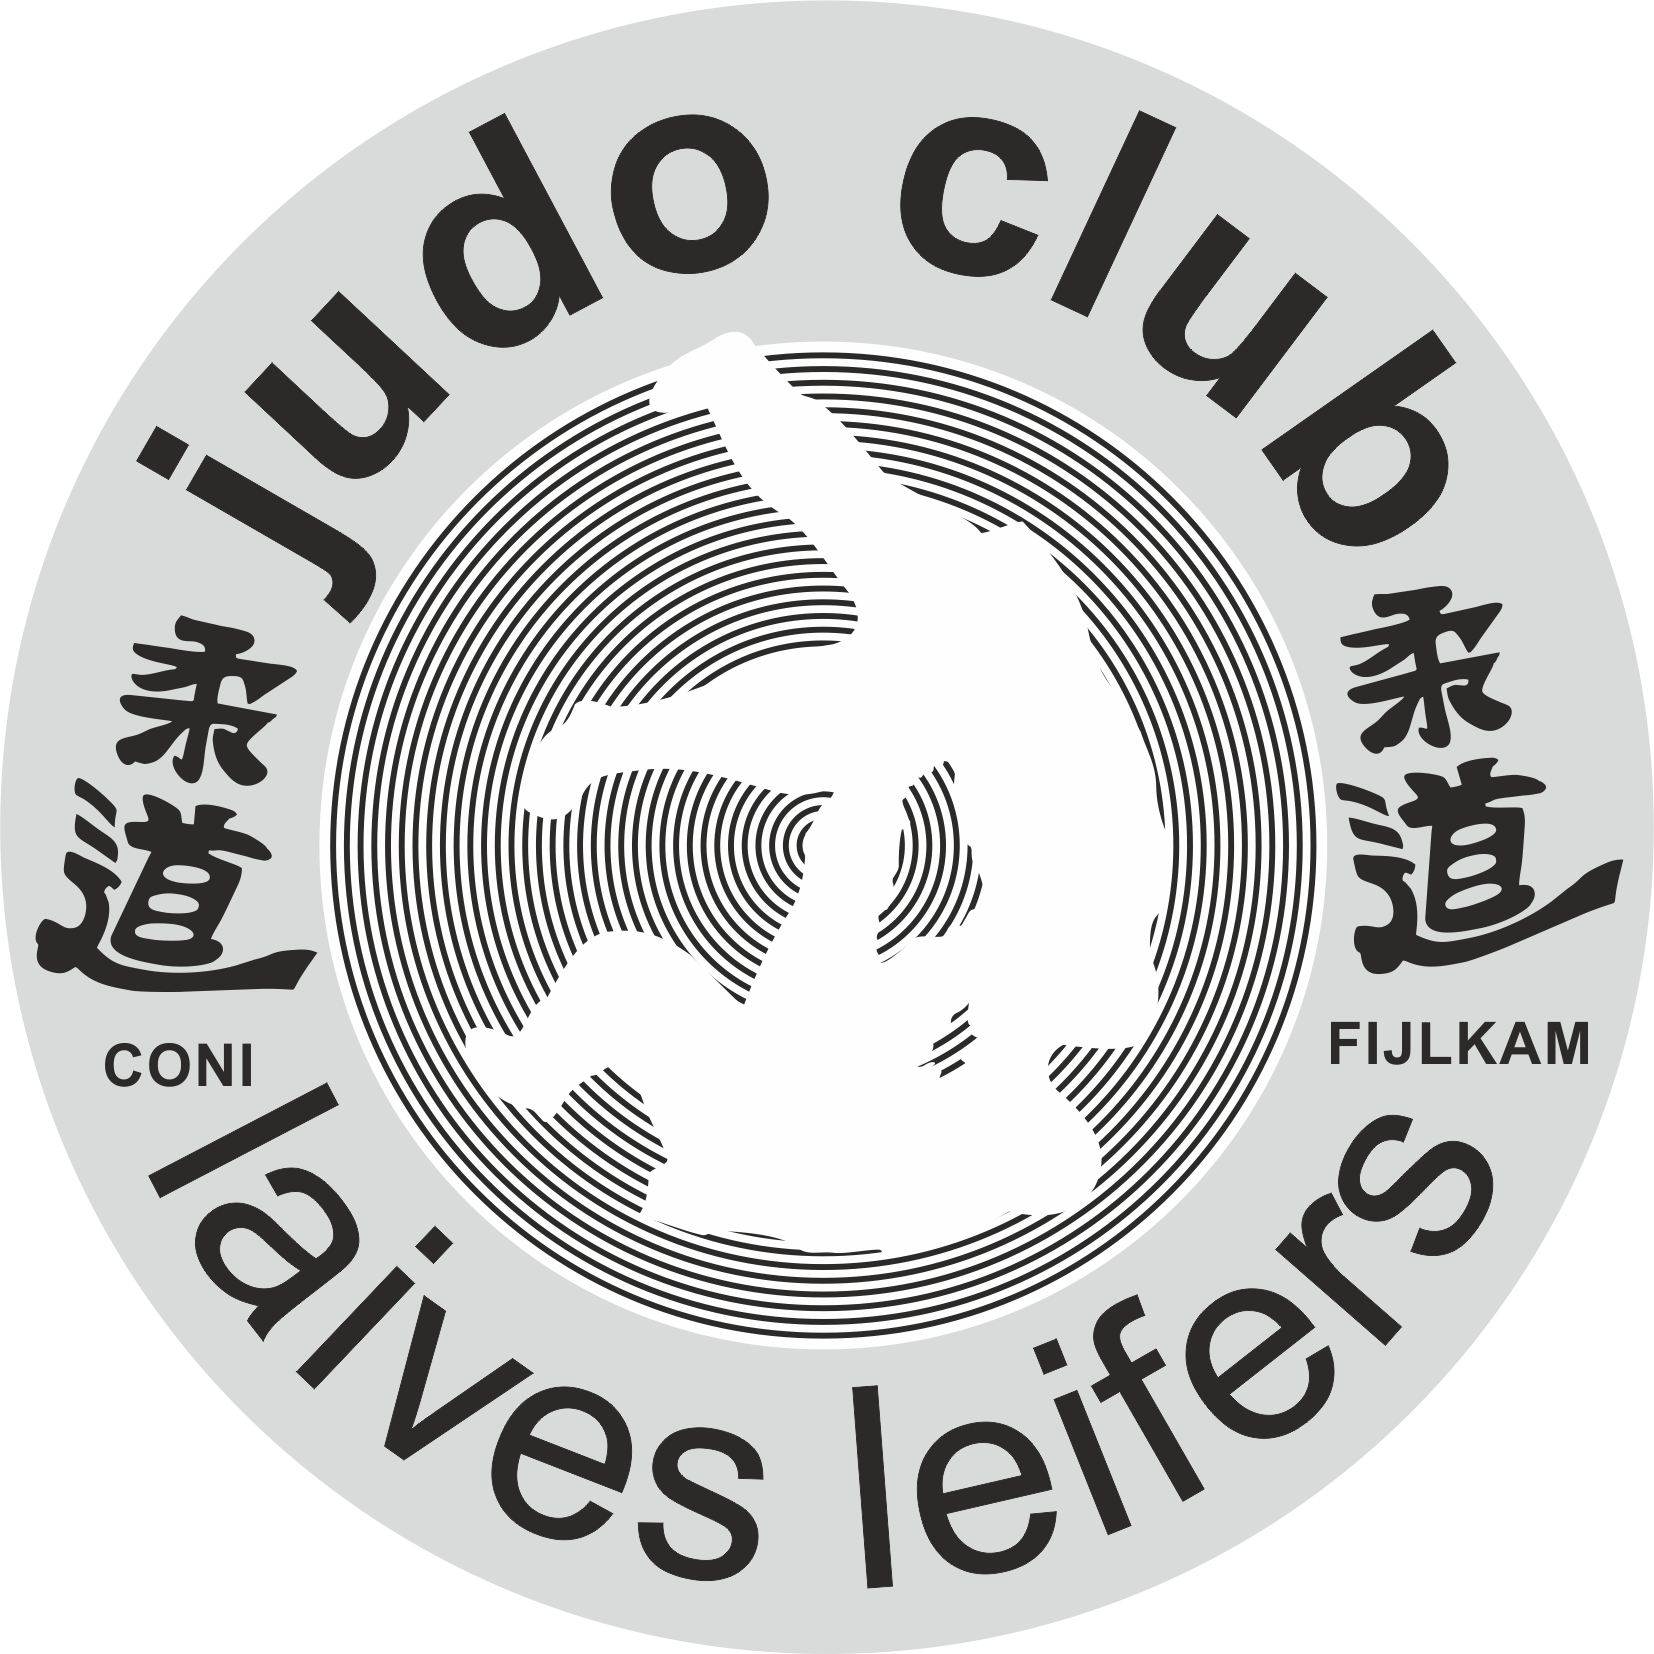 (c) Judoclublaives.it